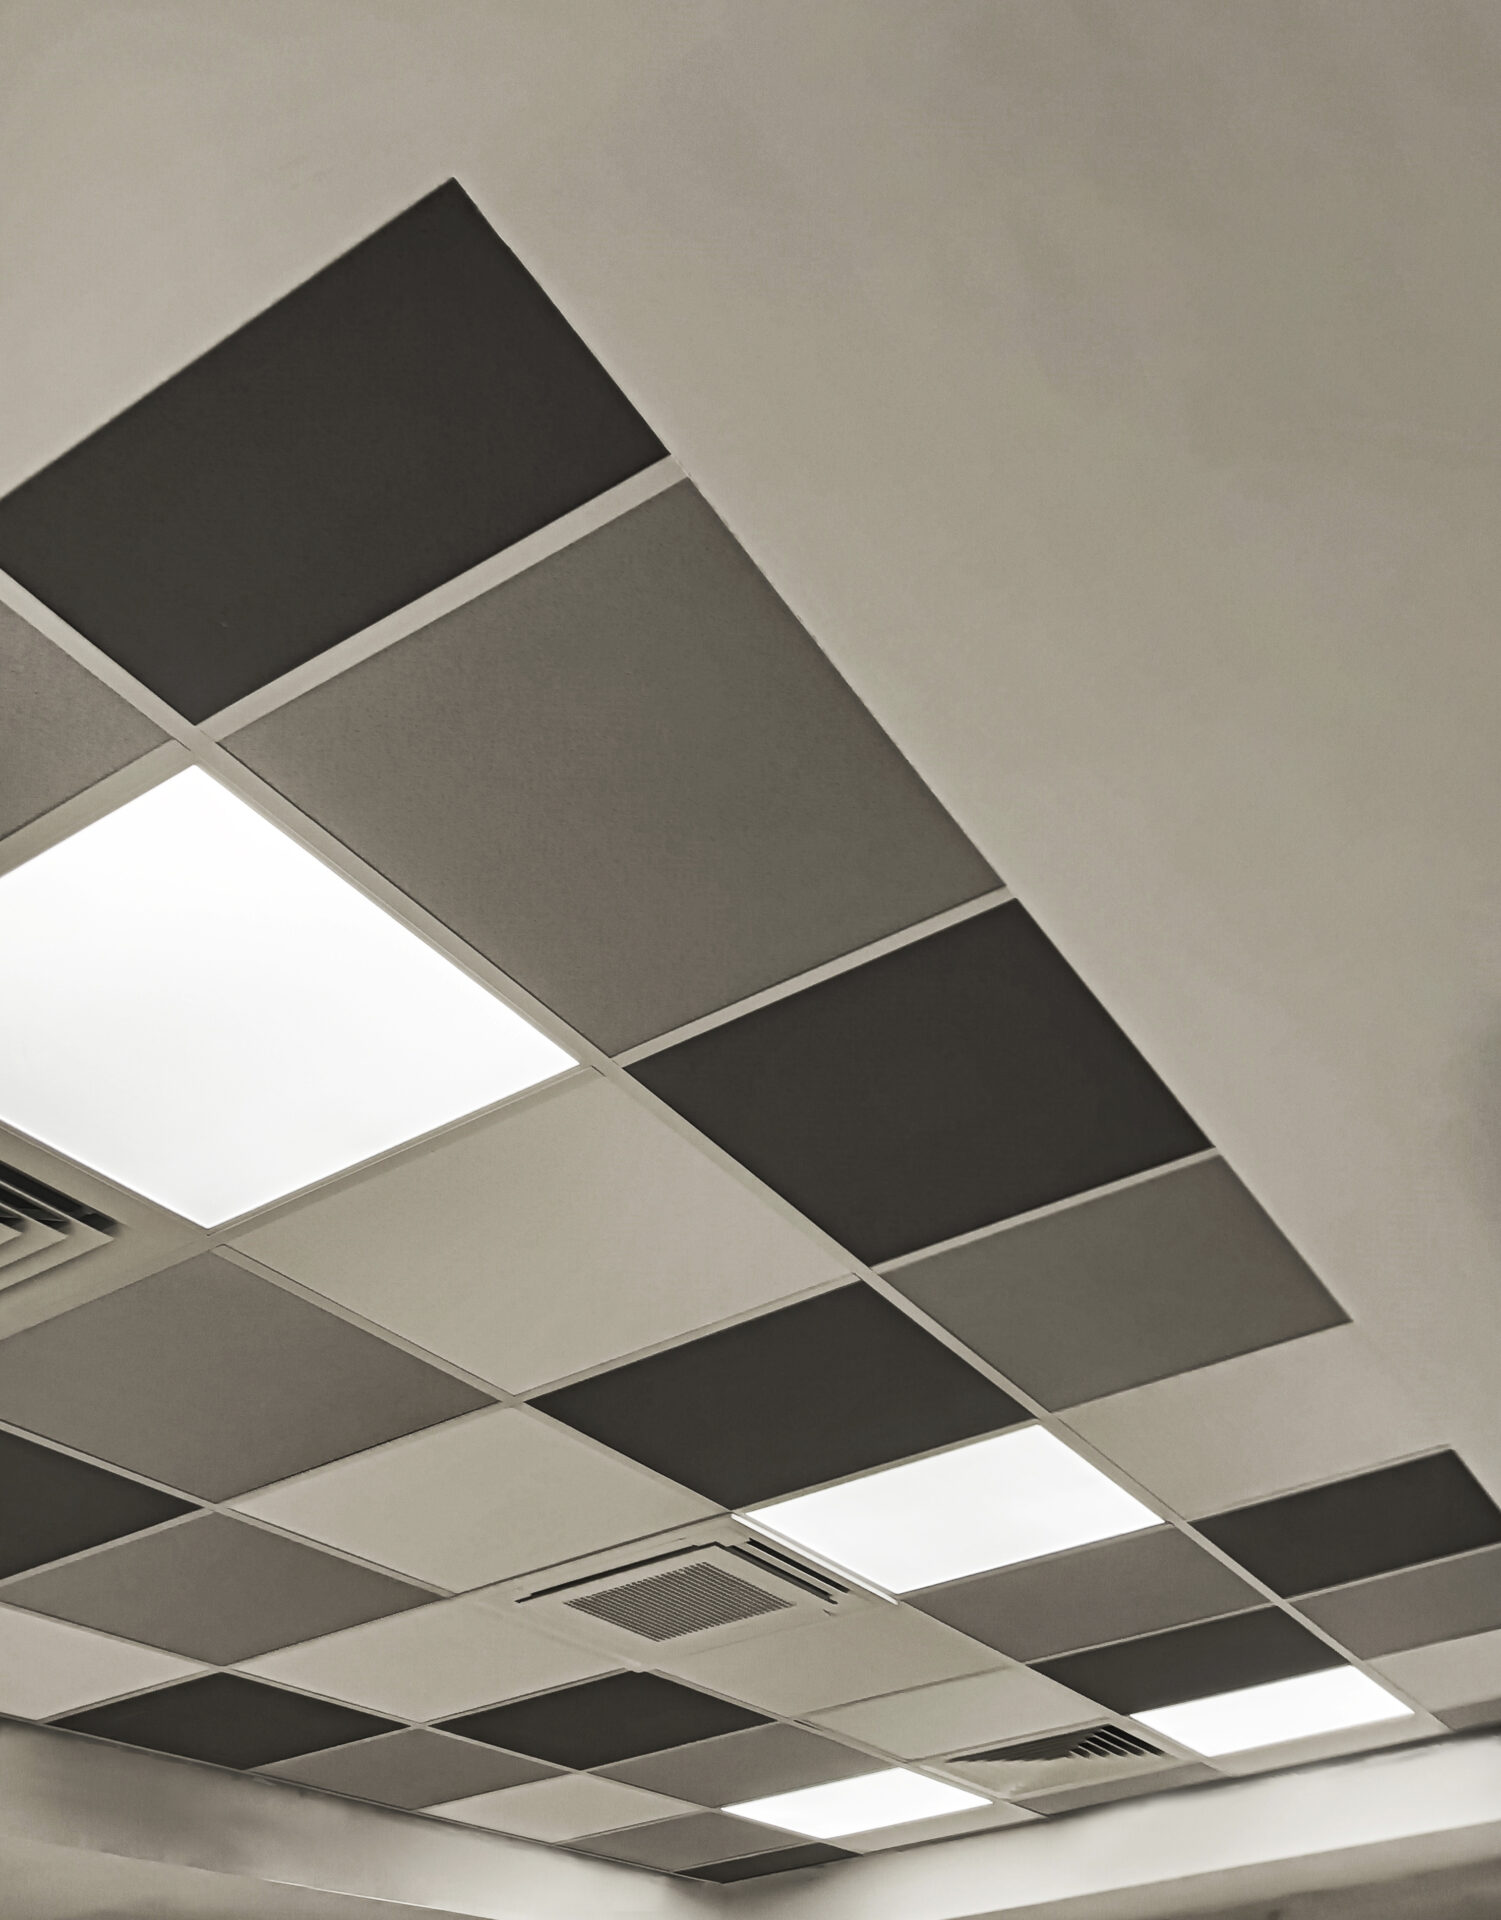 ARUBA: A TRUSTED CEILING TILE FOR GENERATIONS